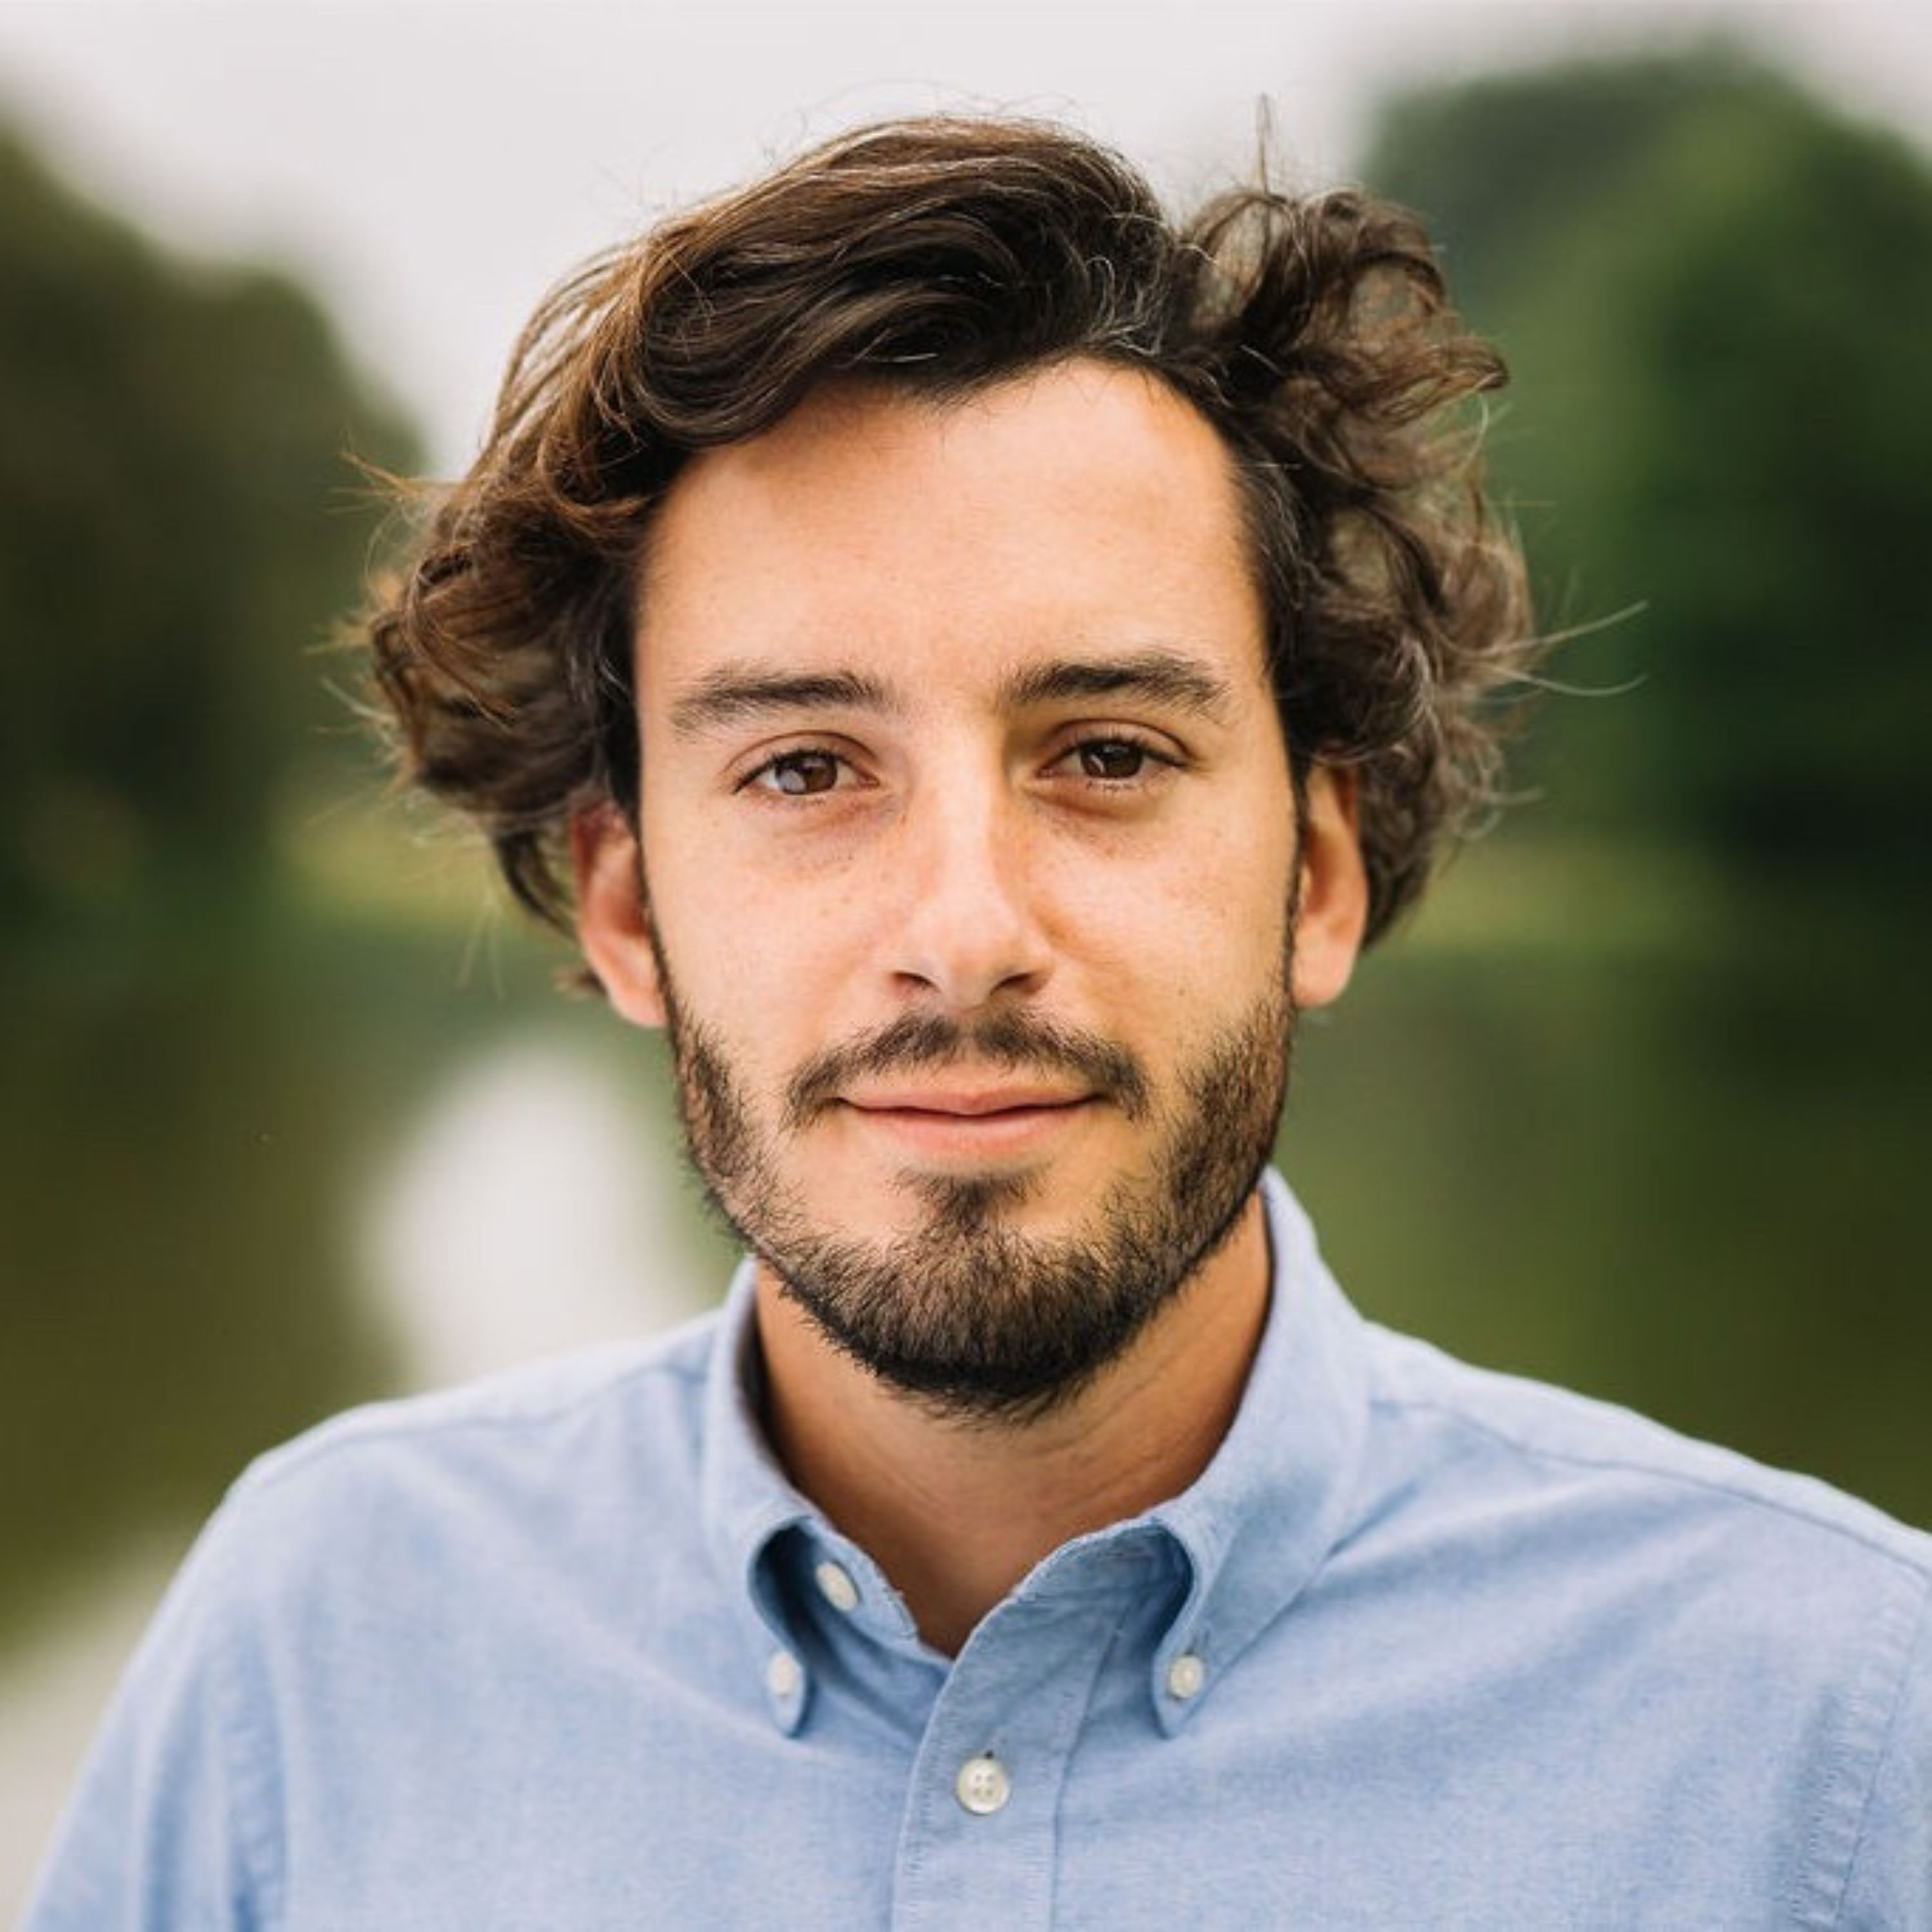 TTLR EP516: Matthieu Mehuys - Beyond Organics! How A Dream Team Can Make Your Dreams Come Alive!